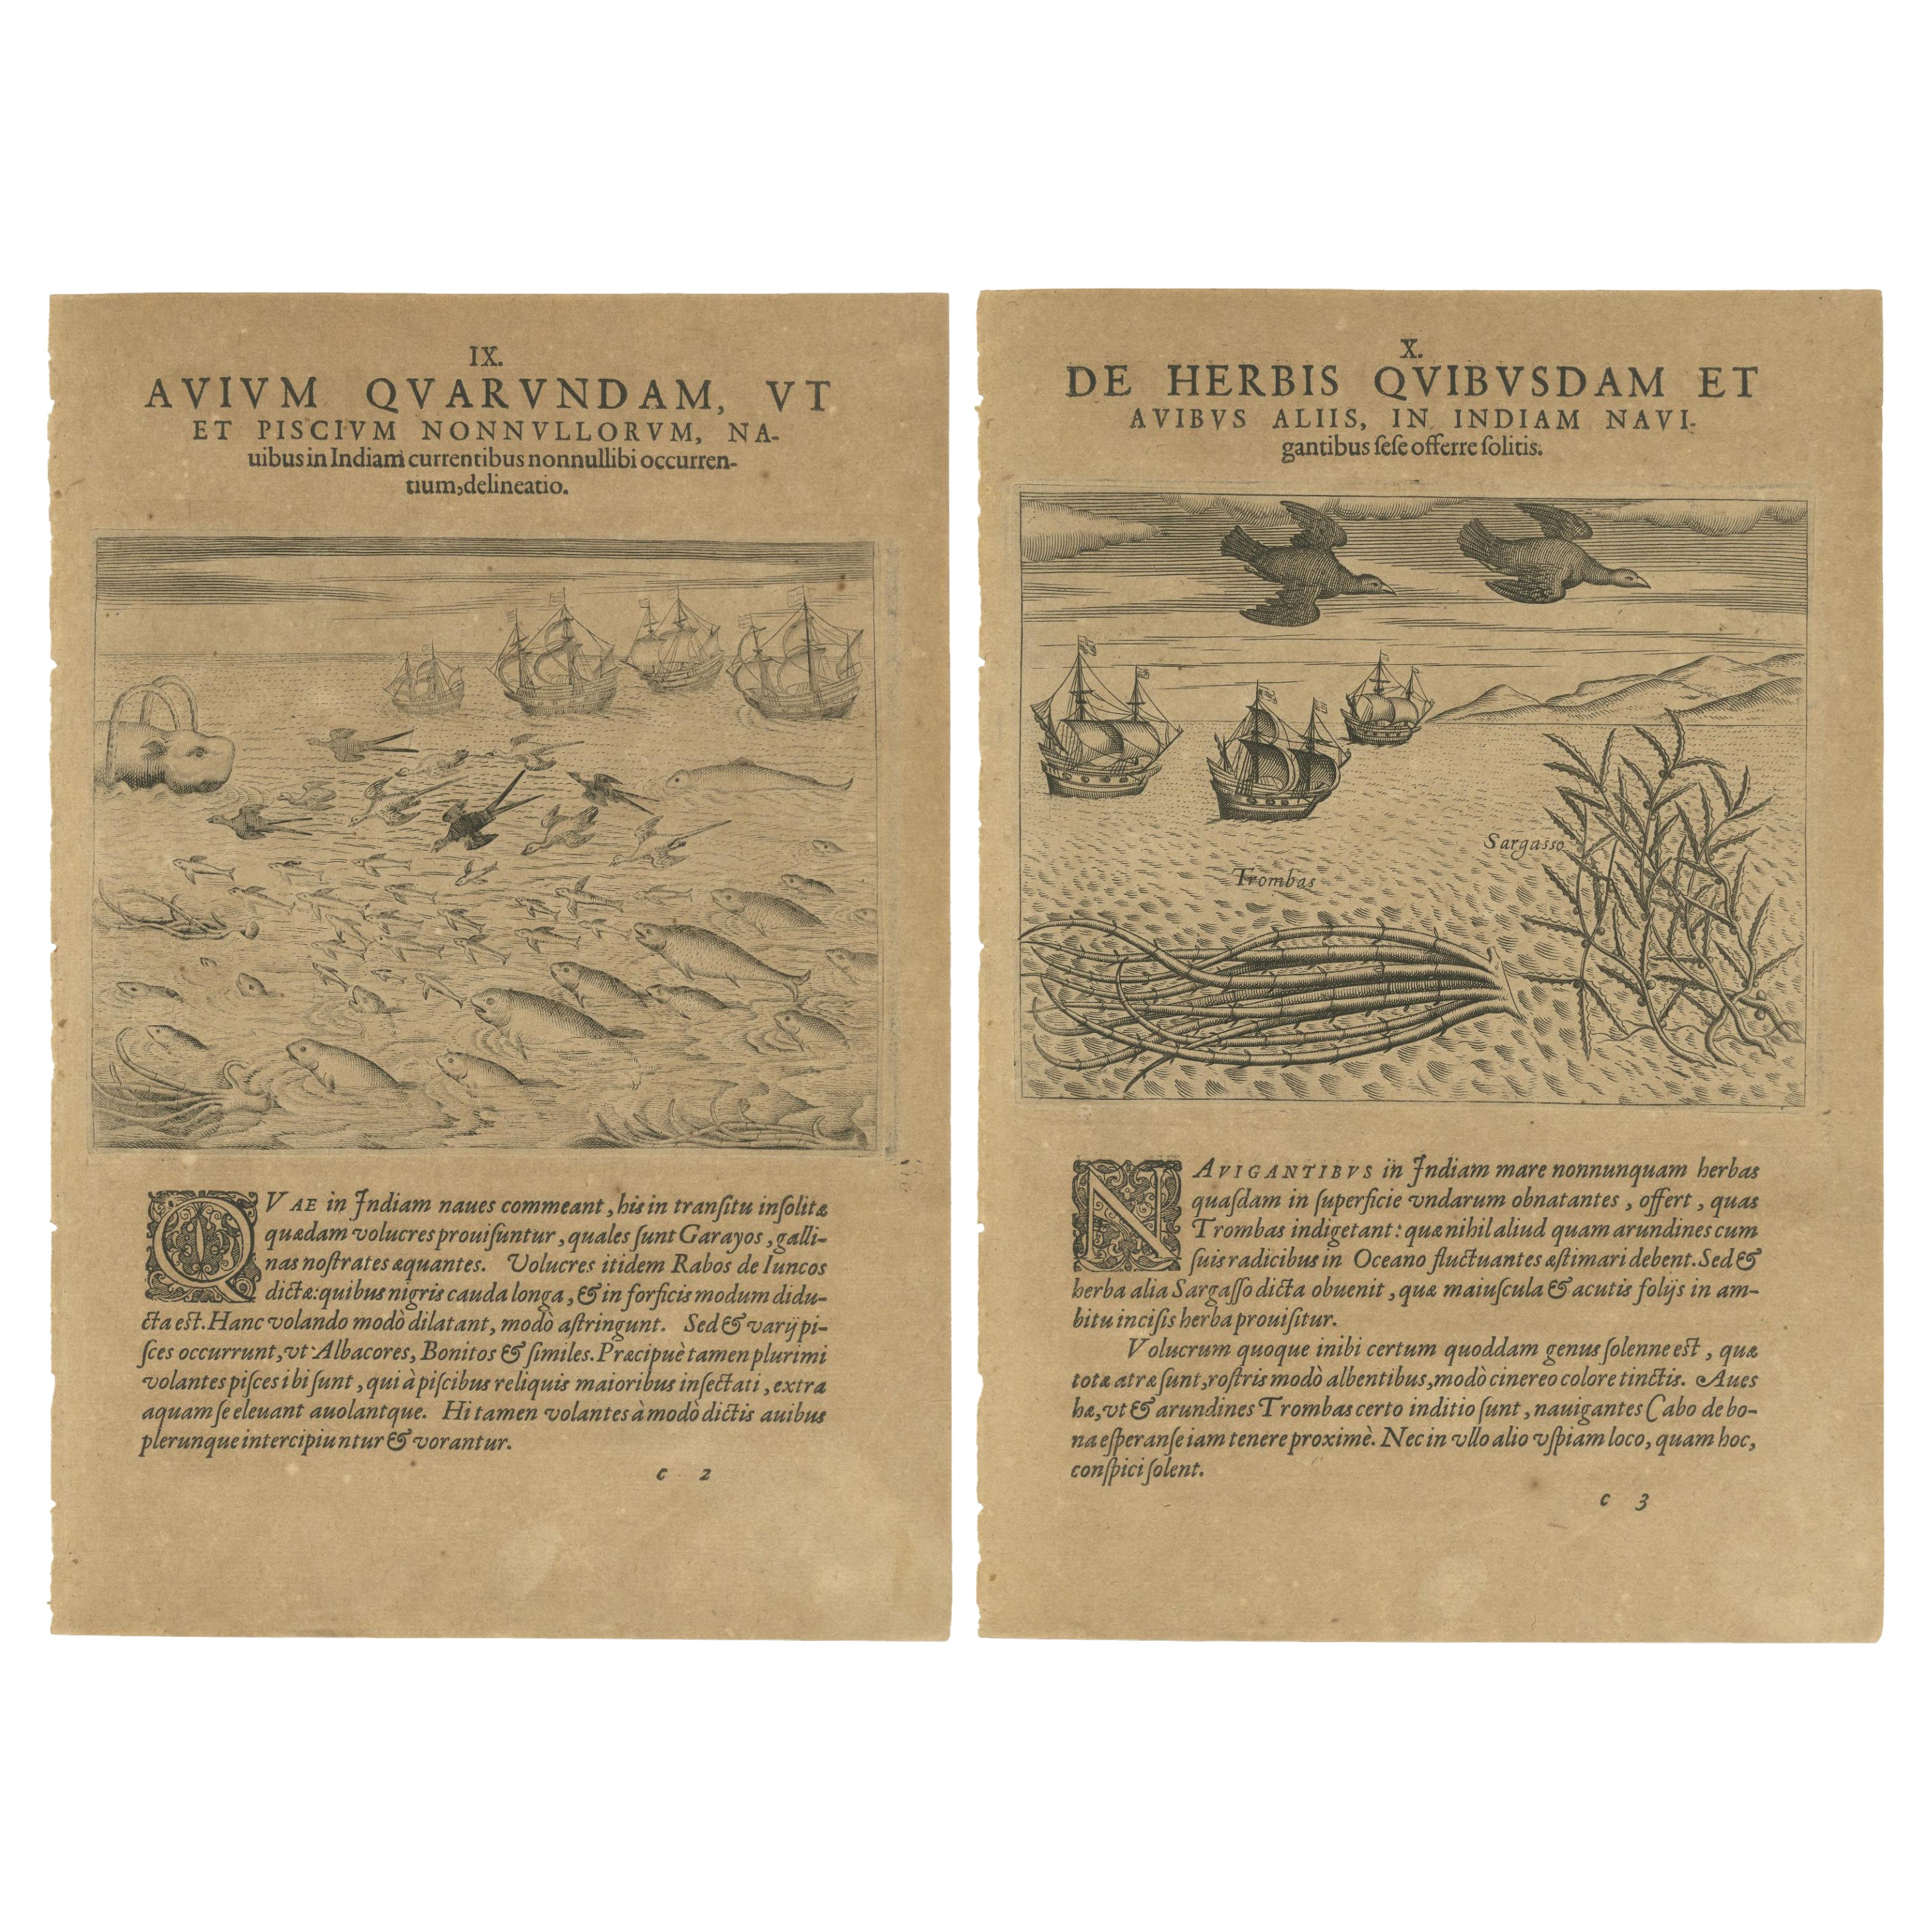 Maritime Life and Flora: Antique Engravings by De Bry, 1601